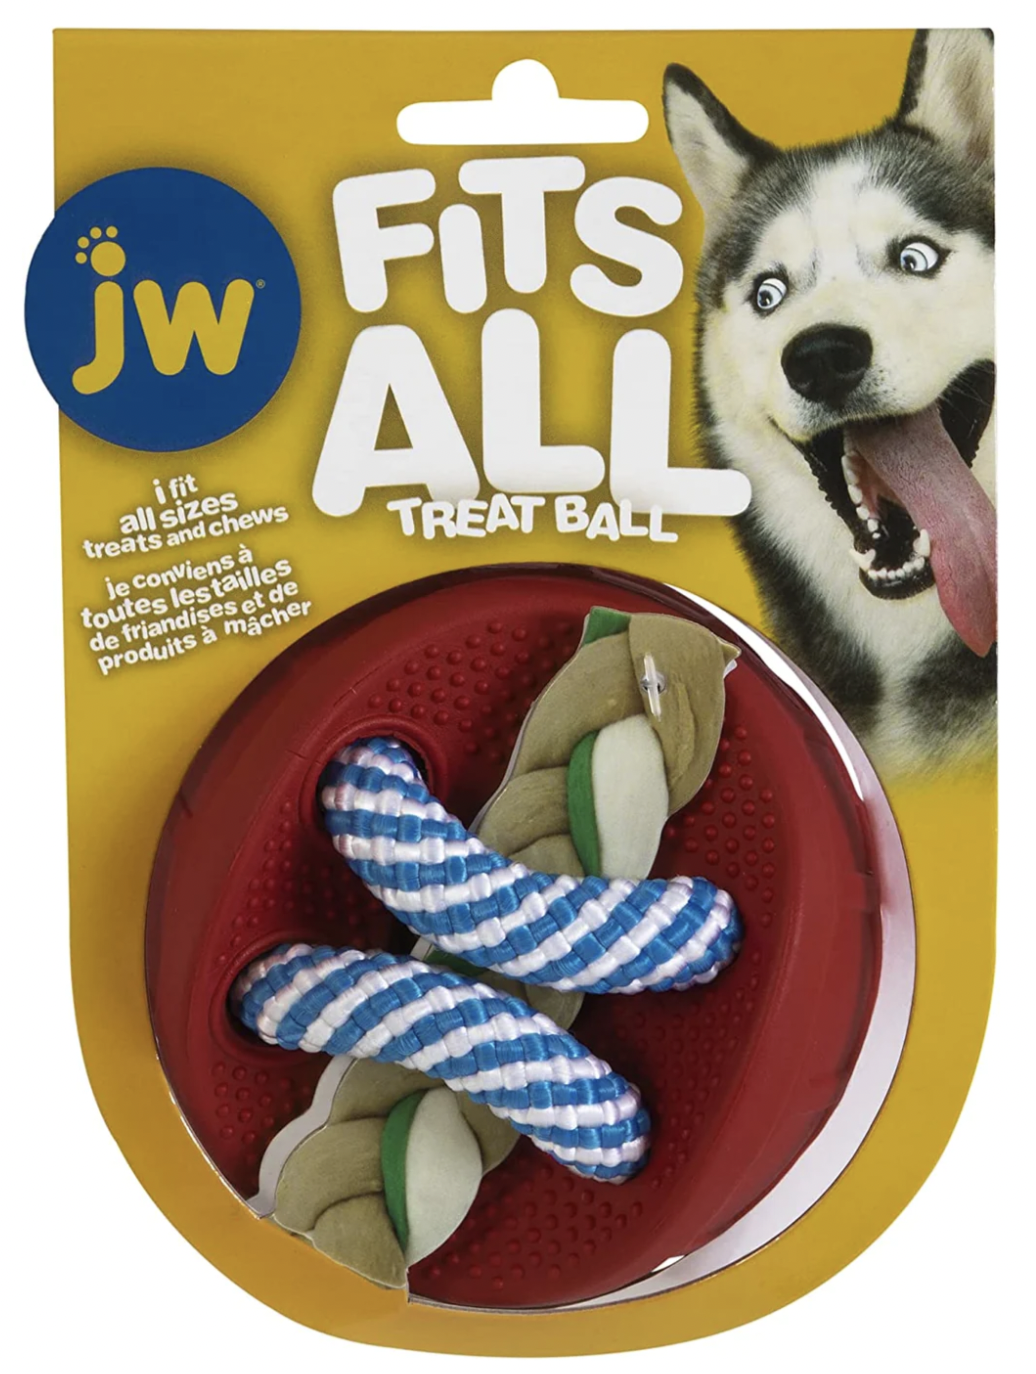 yellow packing with husky playing on it. Holding red ball with blue rope that holds treat